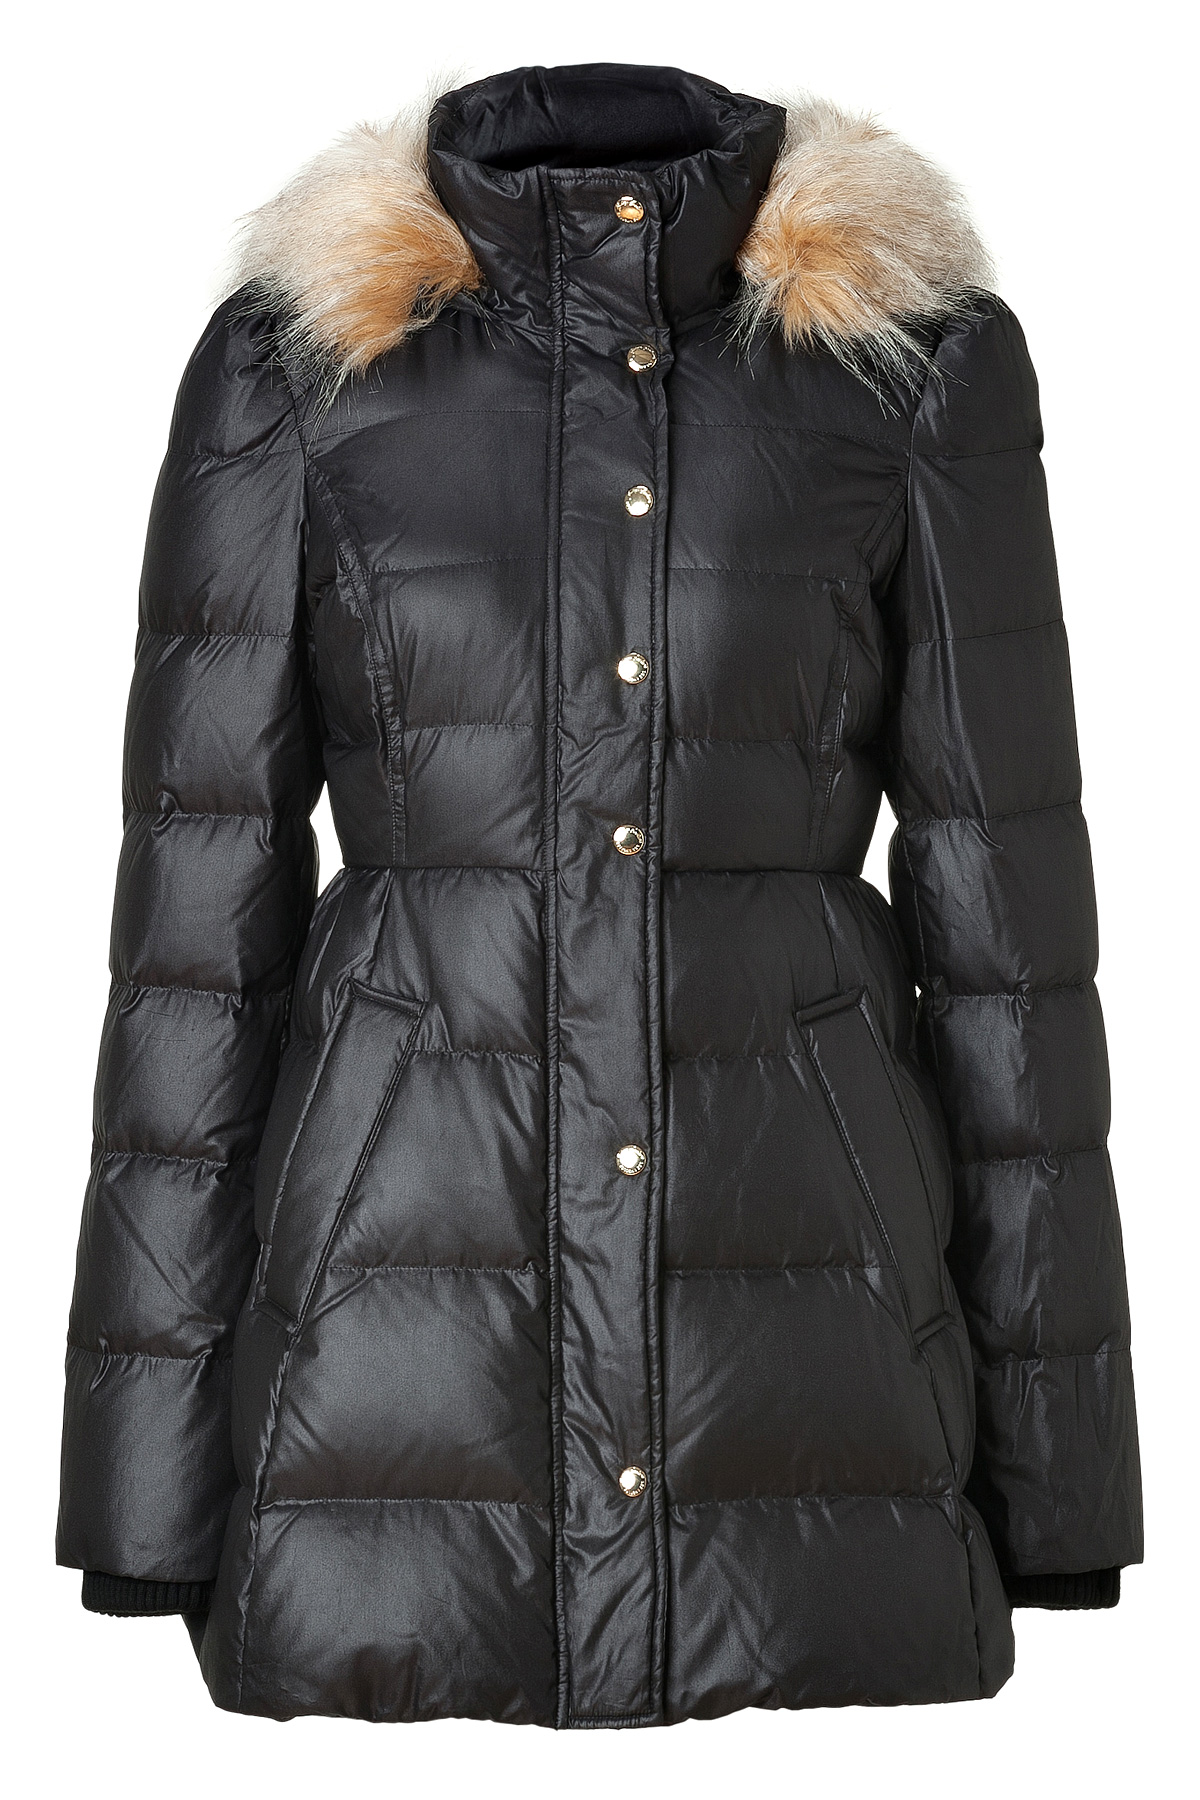 Juicy Couture Pearl Finish Black Puffer Coat in Black (pearl) | Lyst